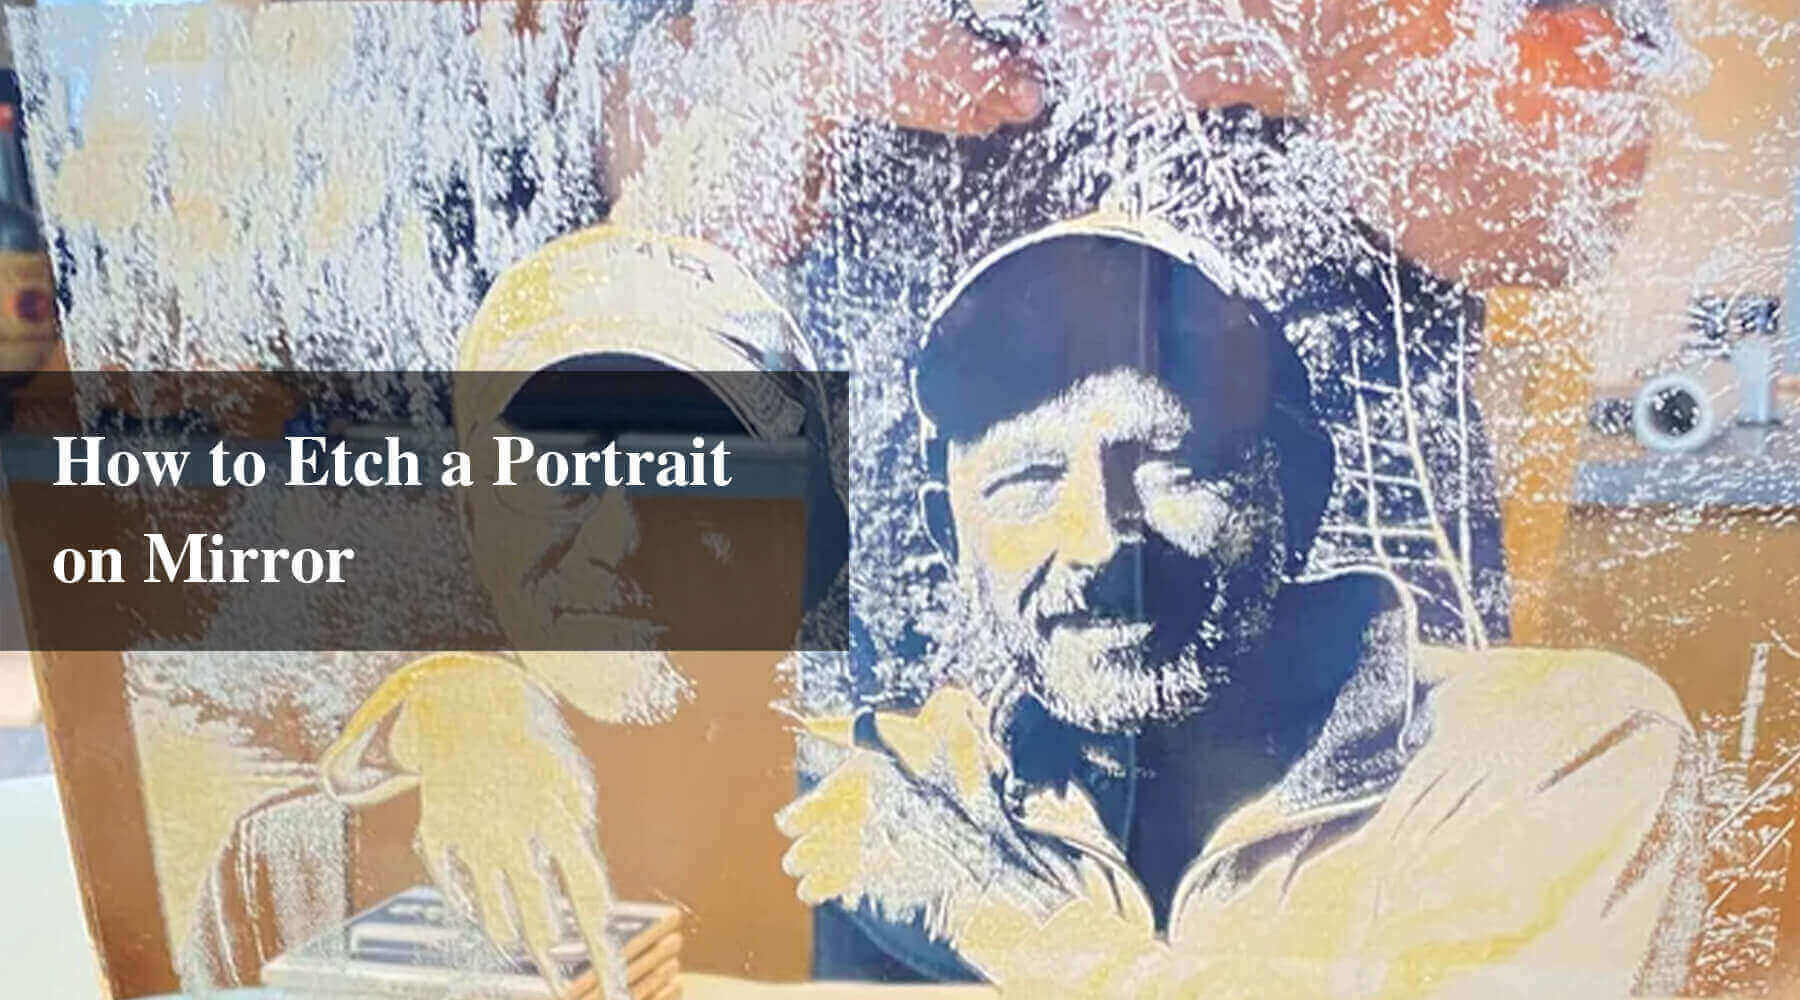 How to Etch a Portrait on Mirror